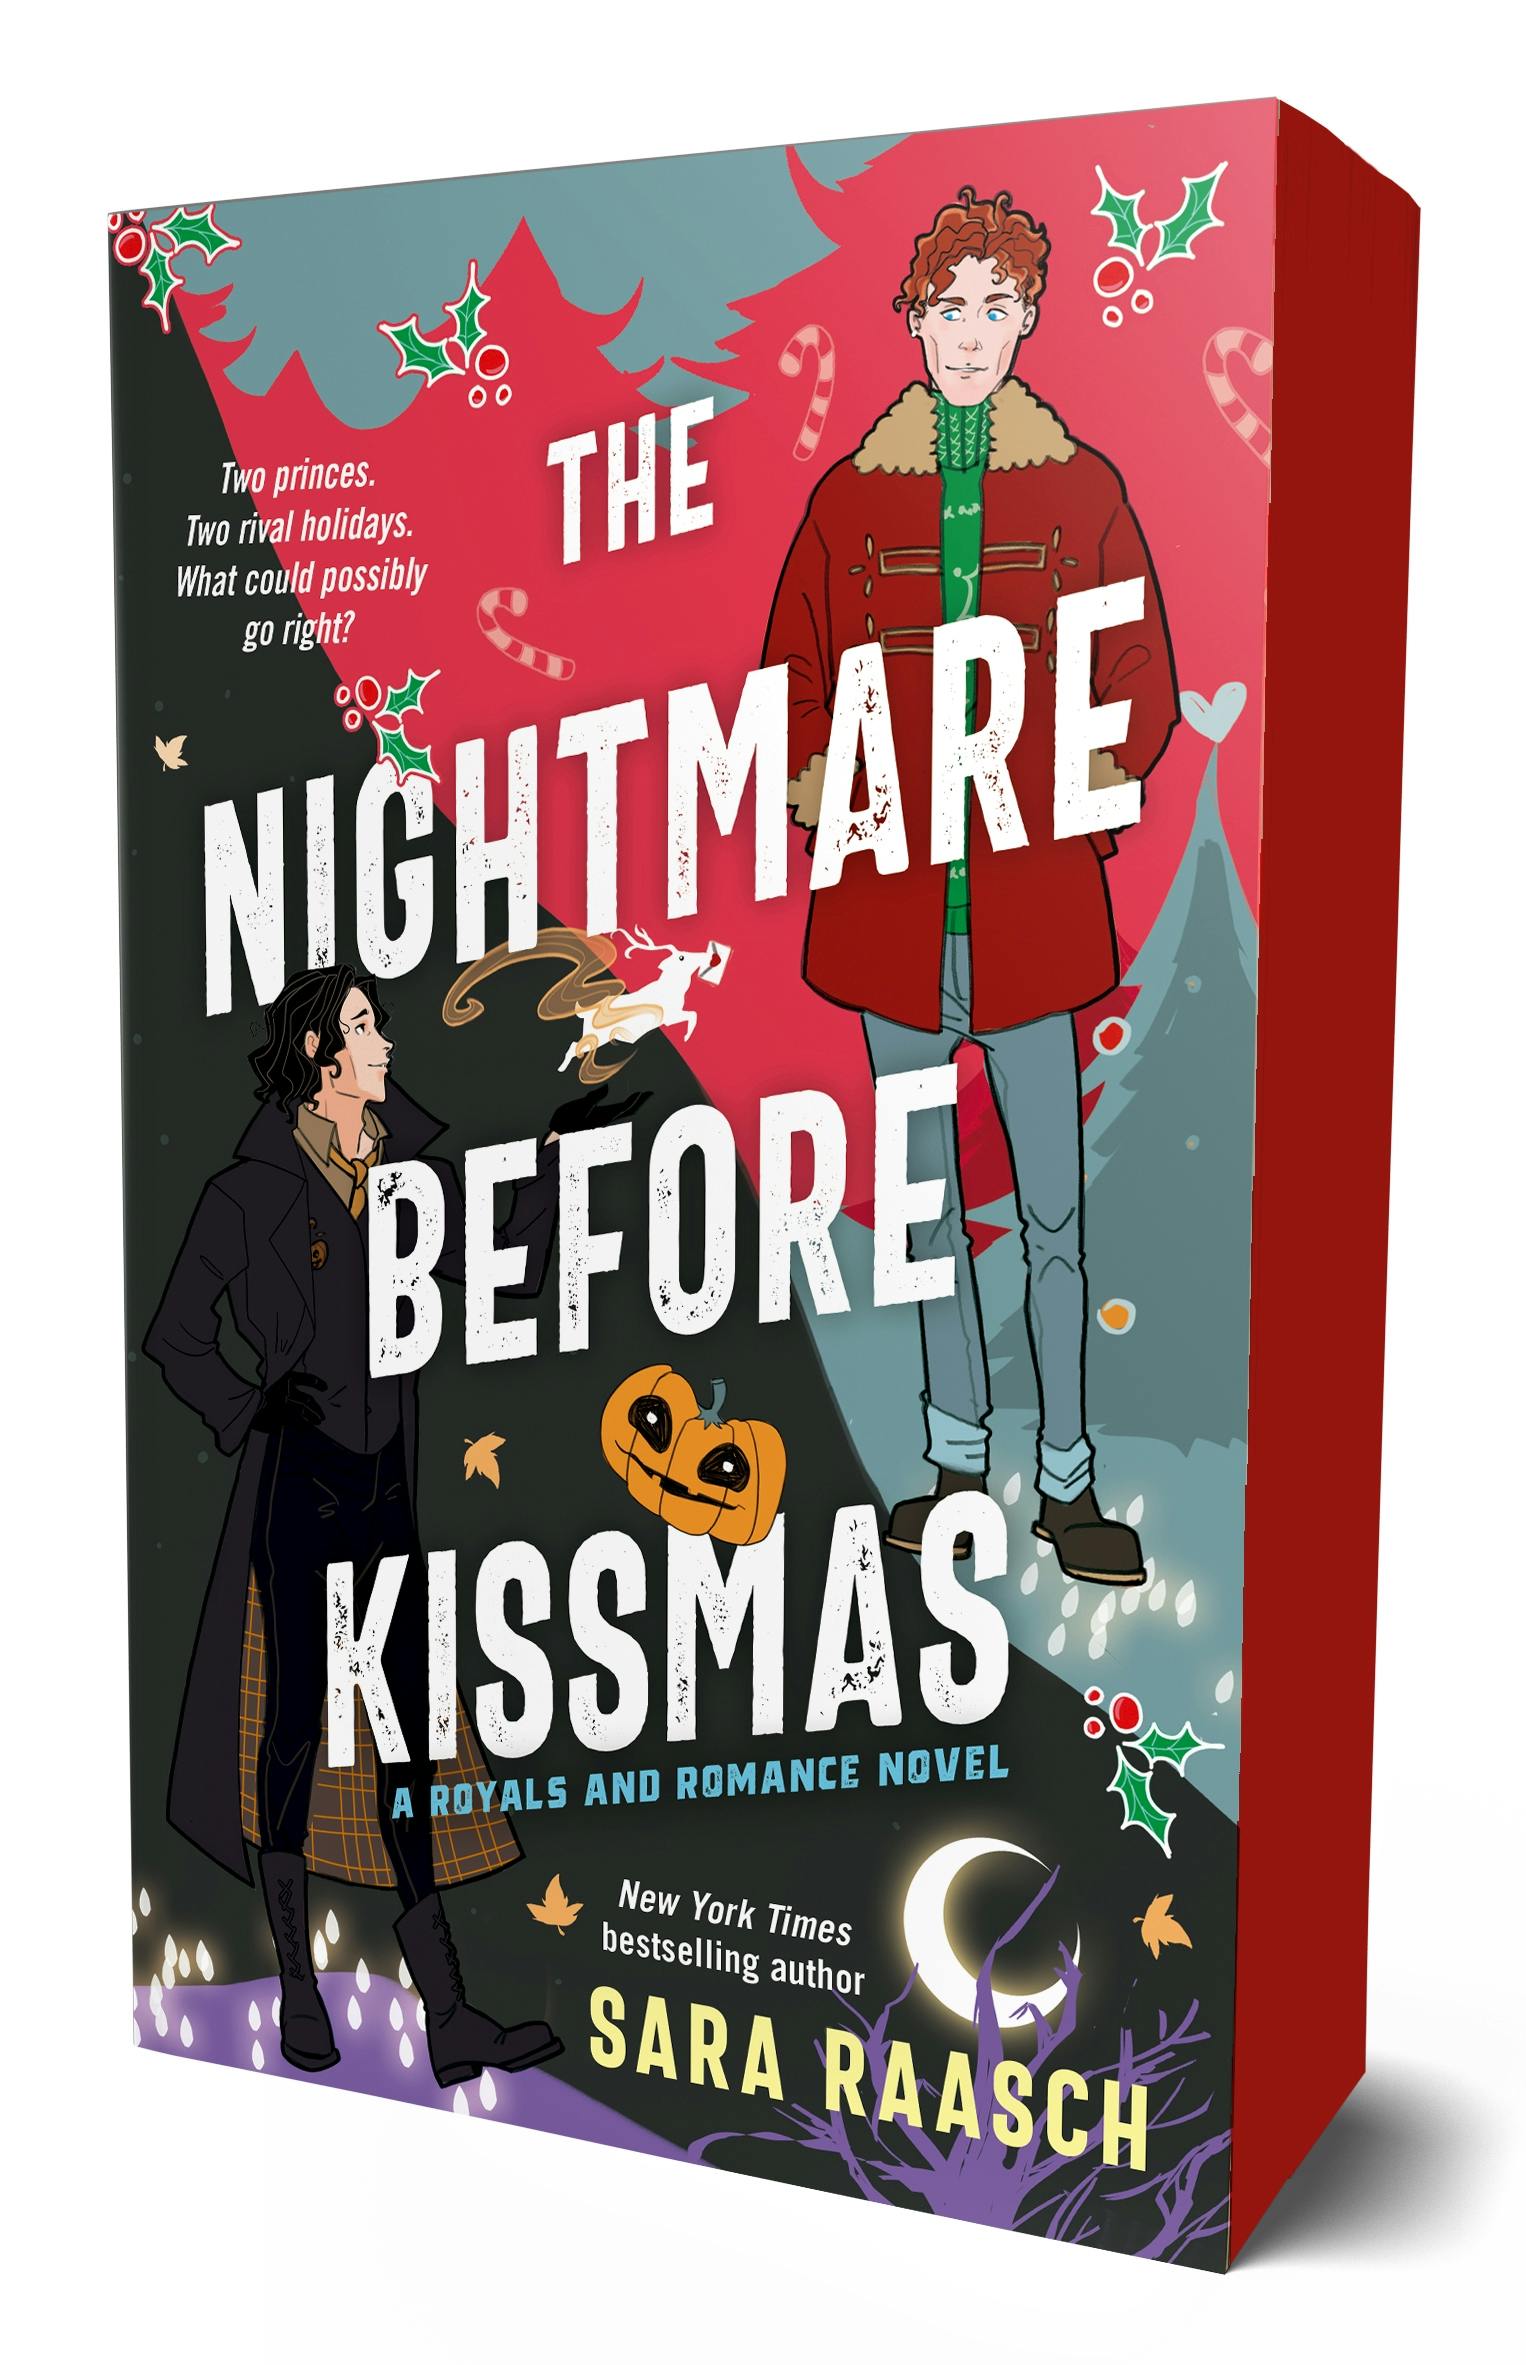 Cover for the book titled as: The Nightmare Before Kissmas